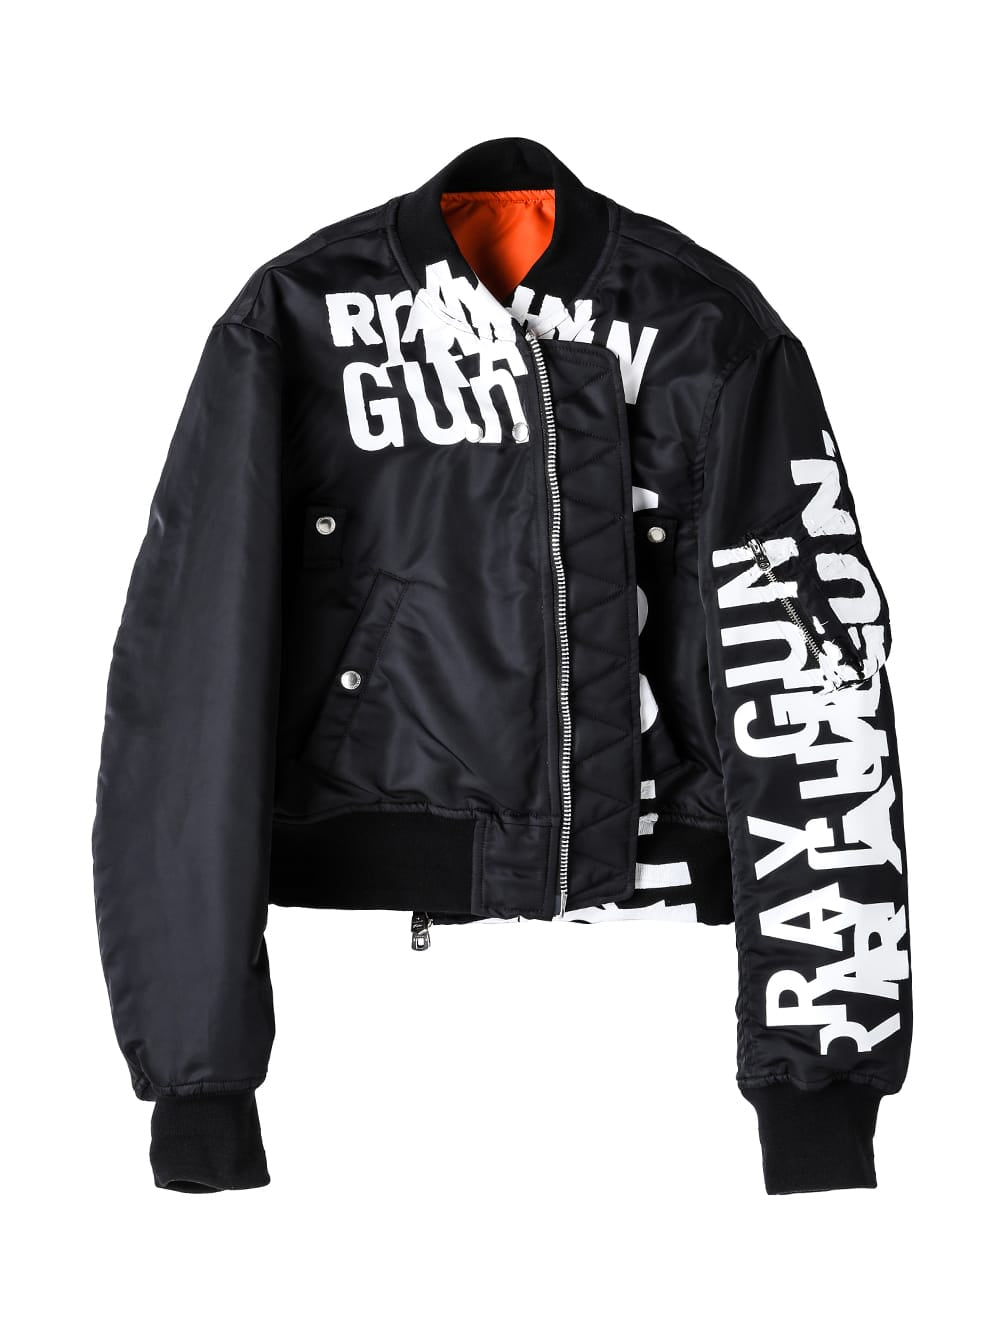 sj.0018aAW23-black two-way cropped bomber jacket. THE TWO OF US 